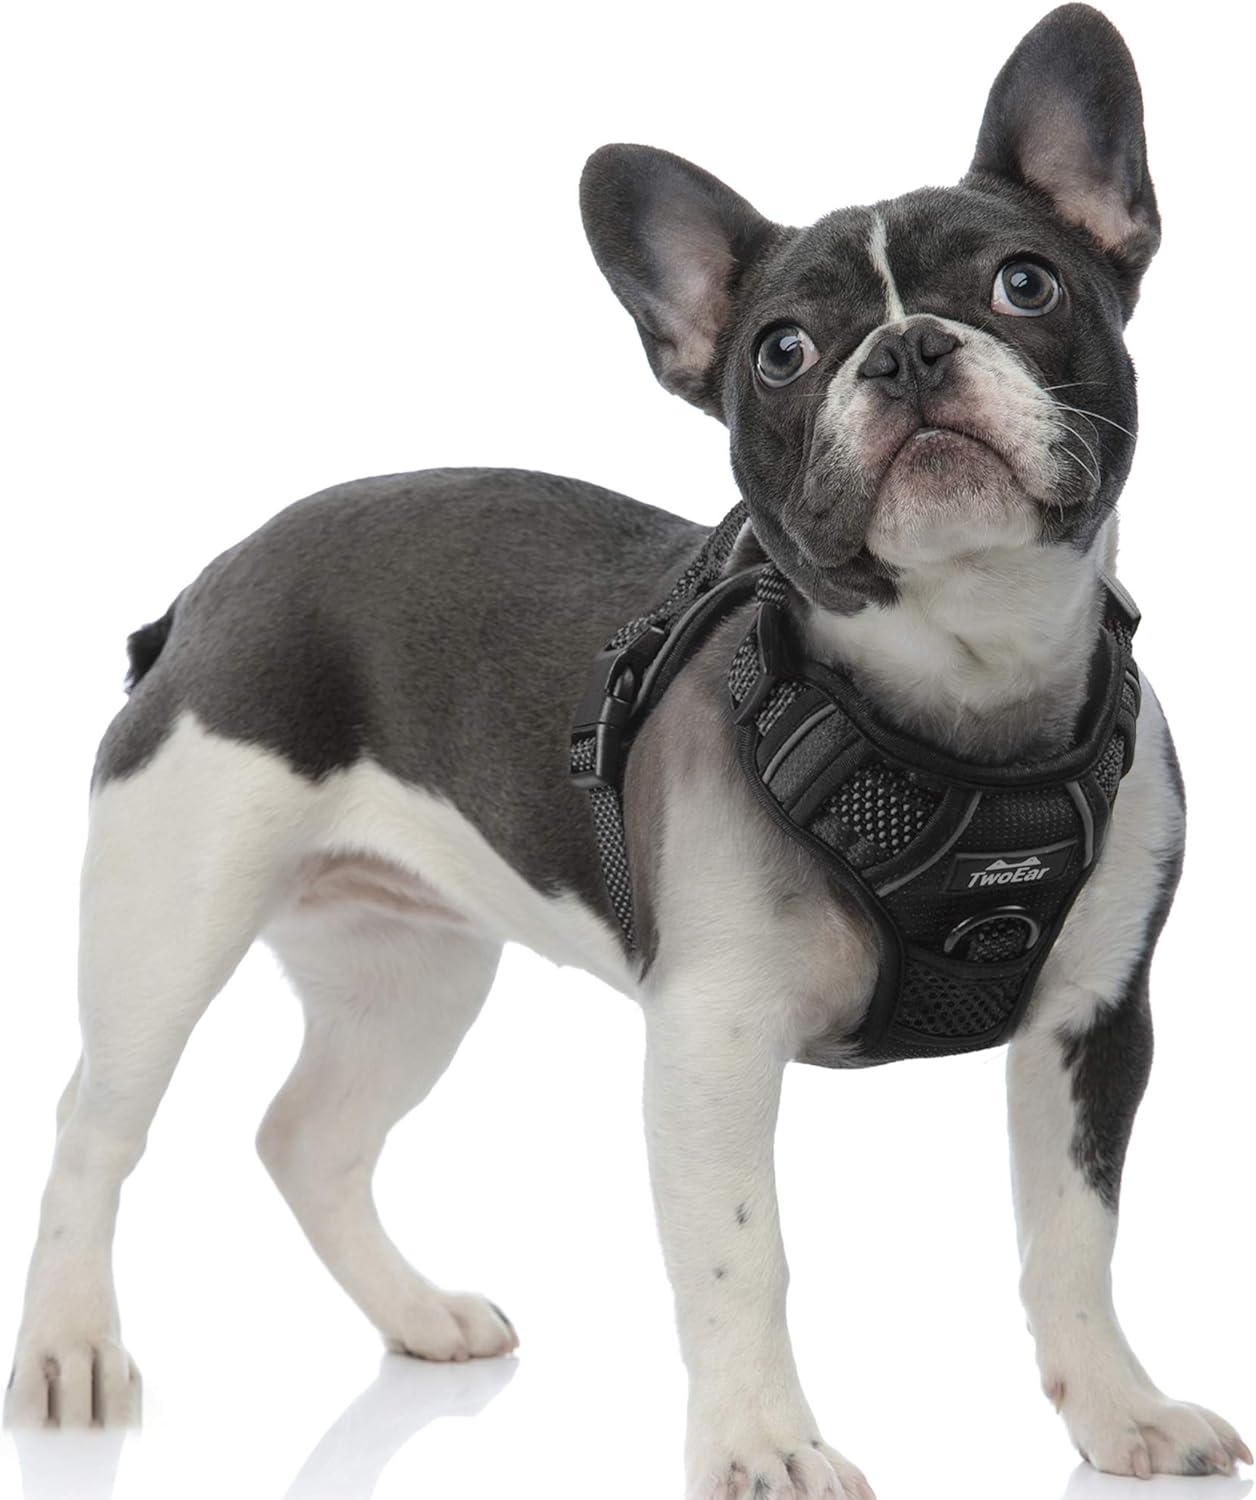 TwoEar Dog Harness, No Pull Reflective Harness Front Clip Easy Control Handle Adjustable Soft Padded Pet Vest for Puppy Small Medium Large Dogs Breed Pet(Small,Black)